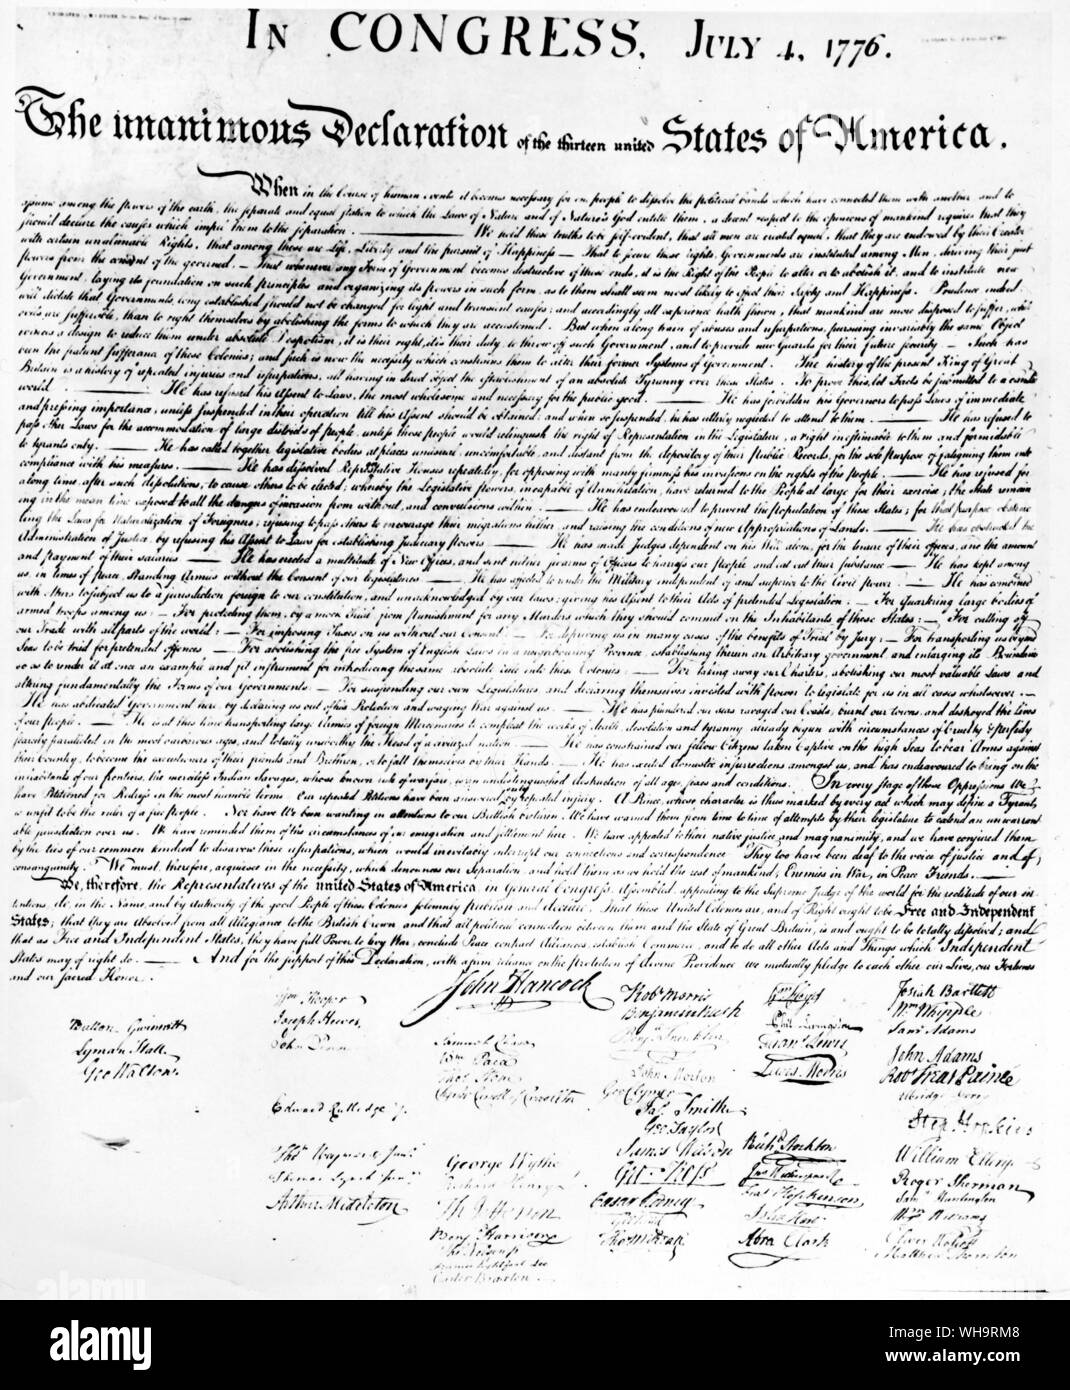 'The Unanimous Declaration of the thirteen united States of America', July 4th 1776. Stock Photo